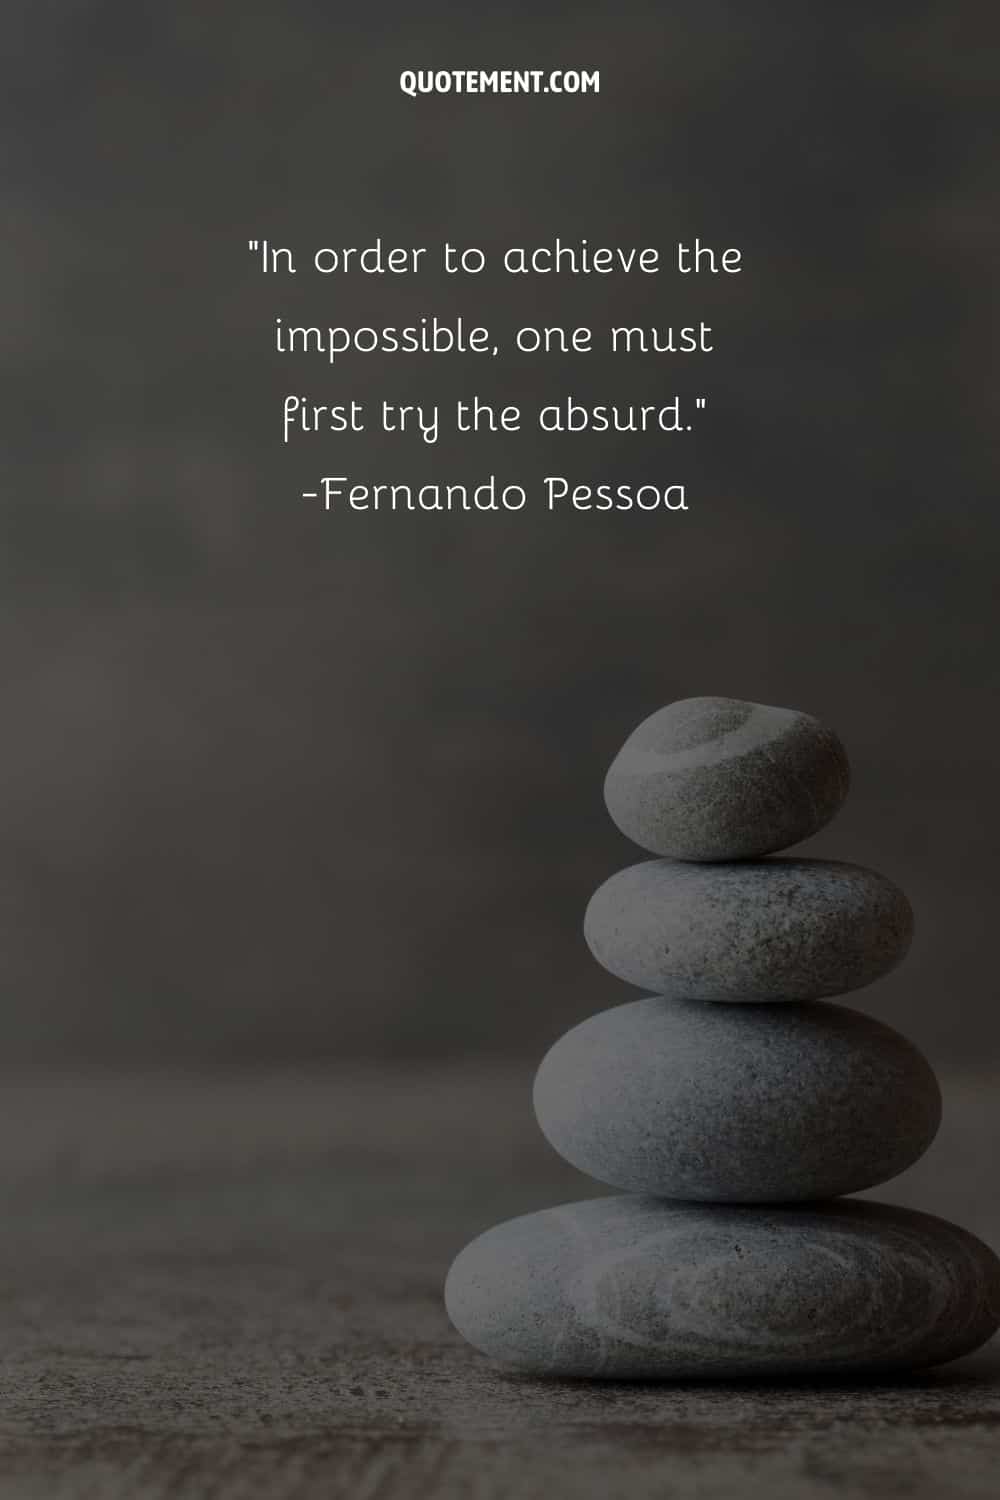 In order to achieve the impossible, one must first try the absurd